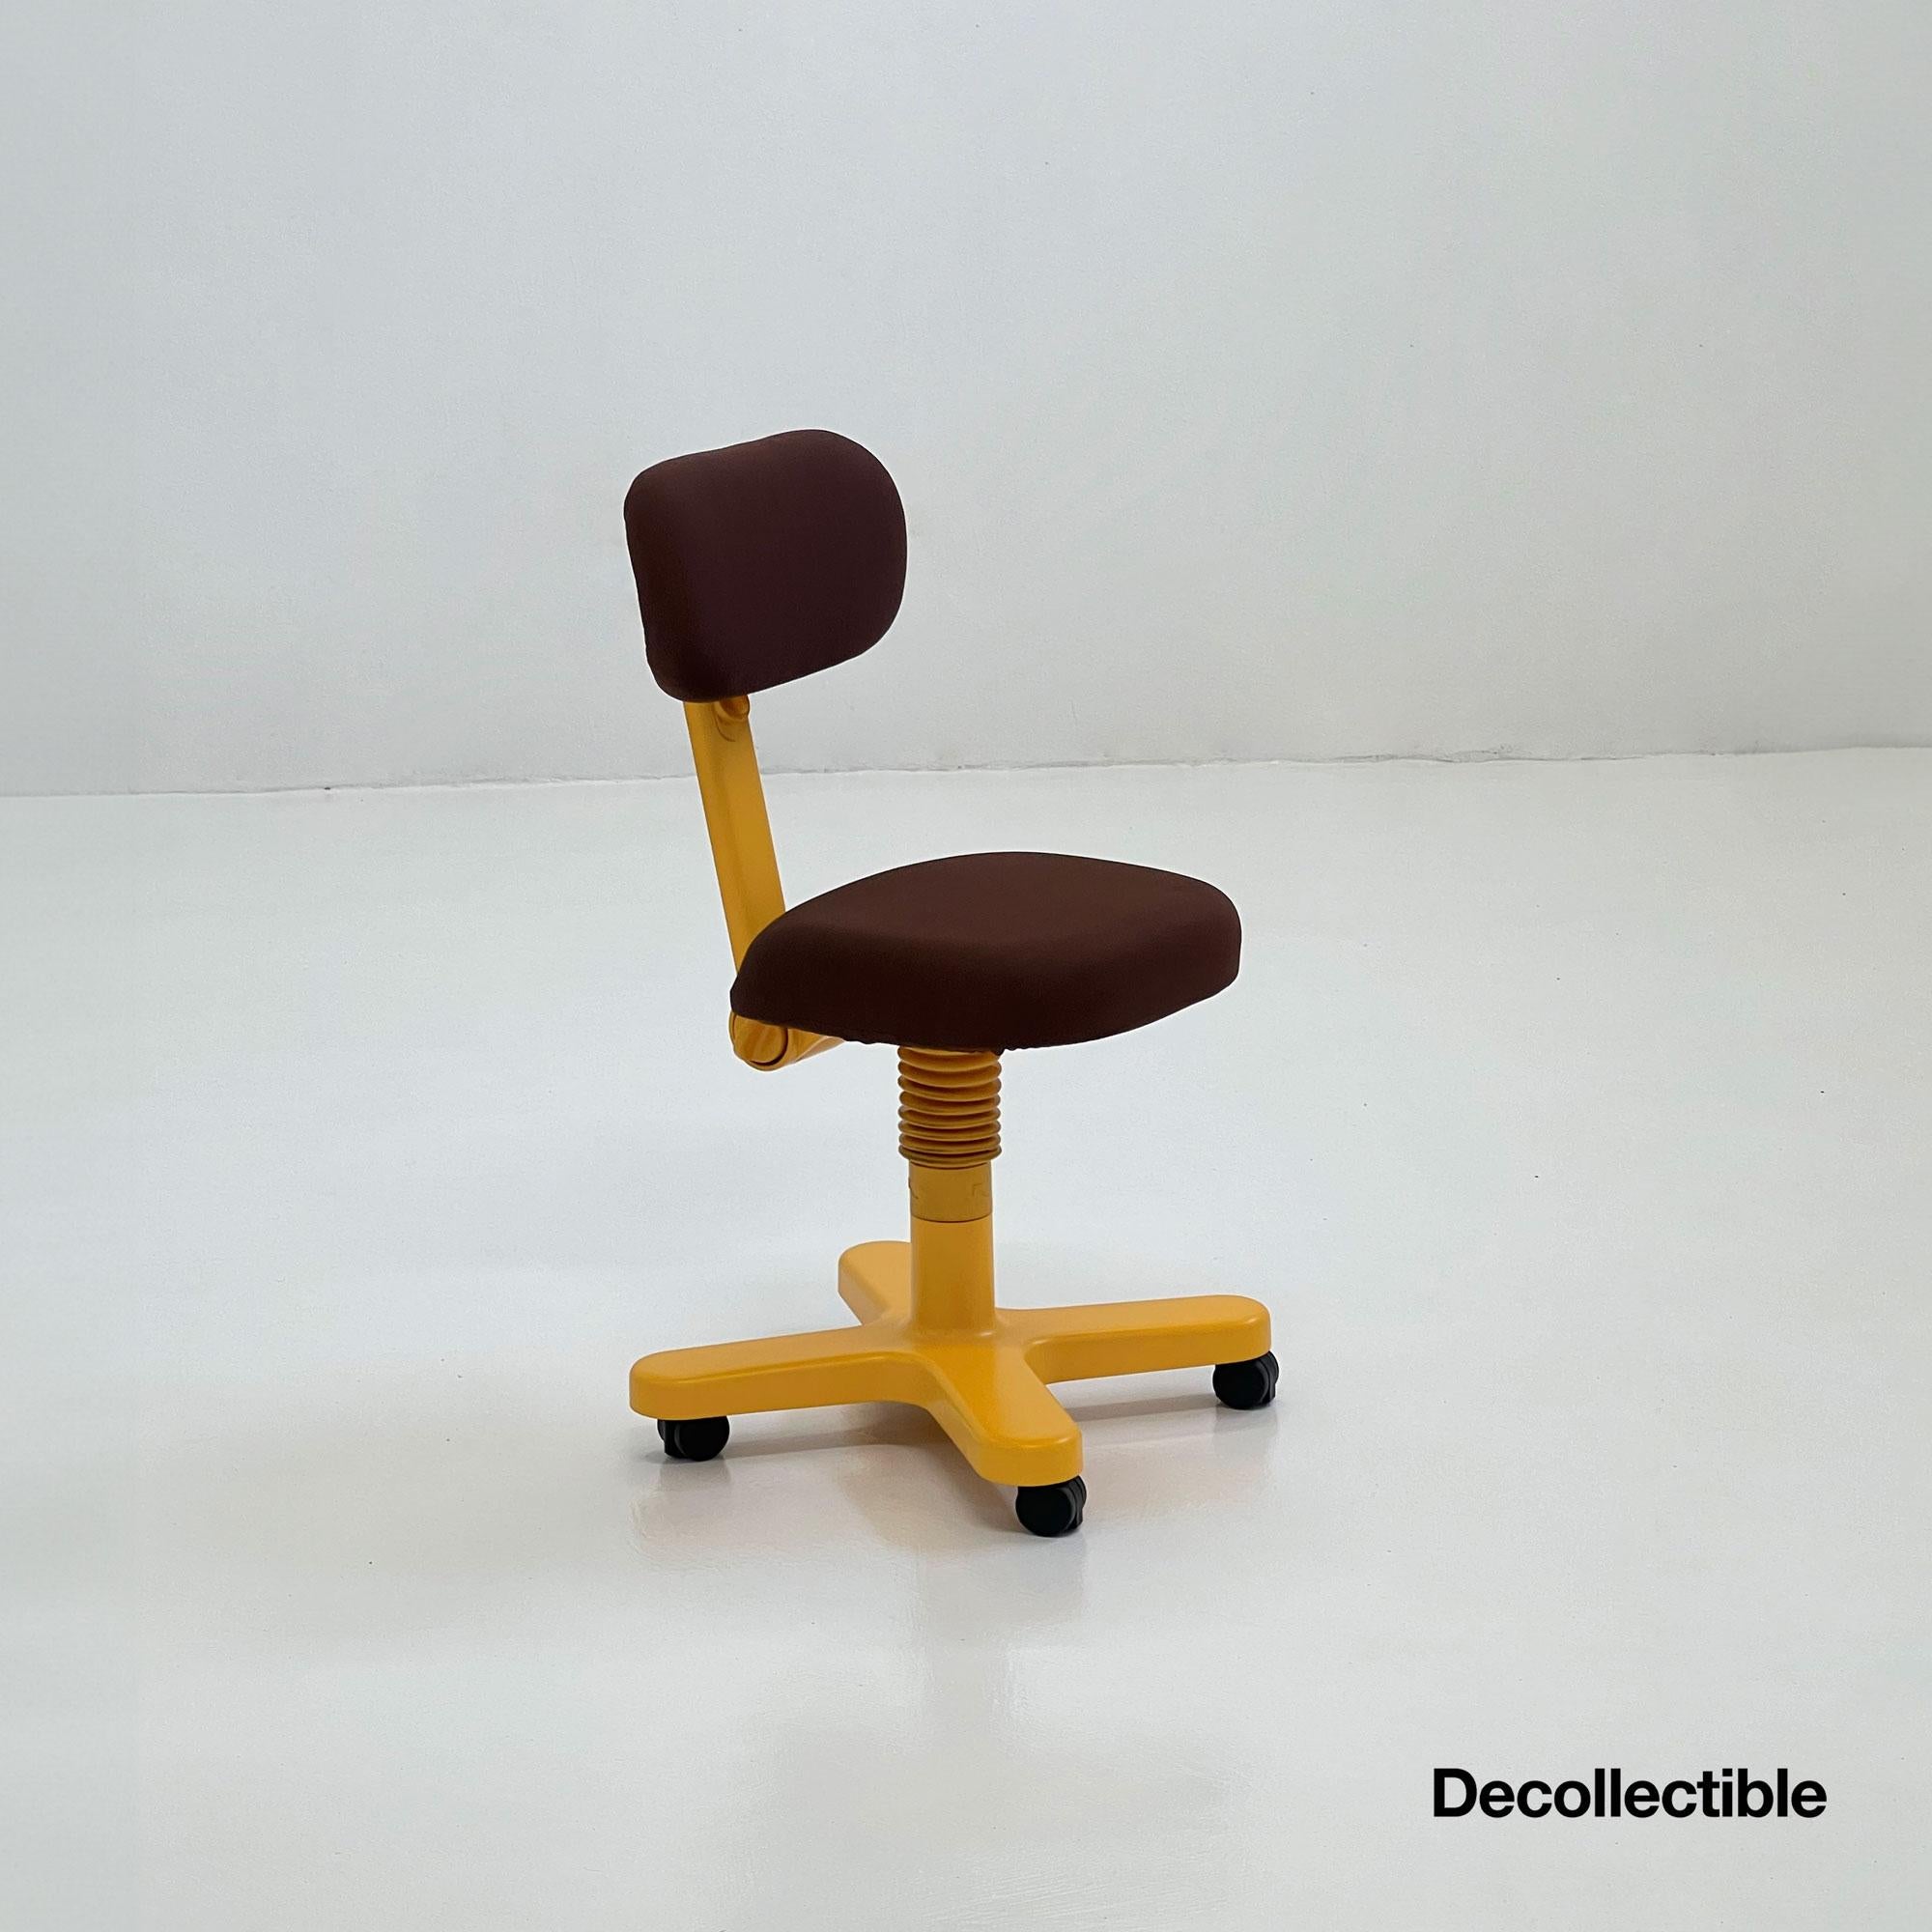  Desk Chair Mod.Synthesis 45 Designed by Ettore Sottsass for Olivetti, Italy 197 For Sale 5